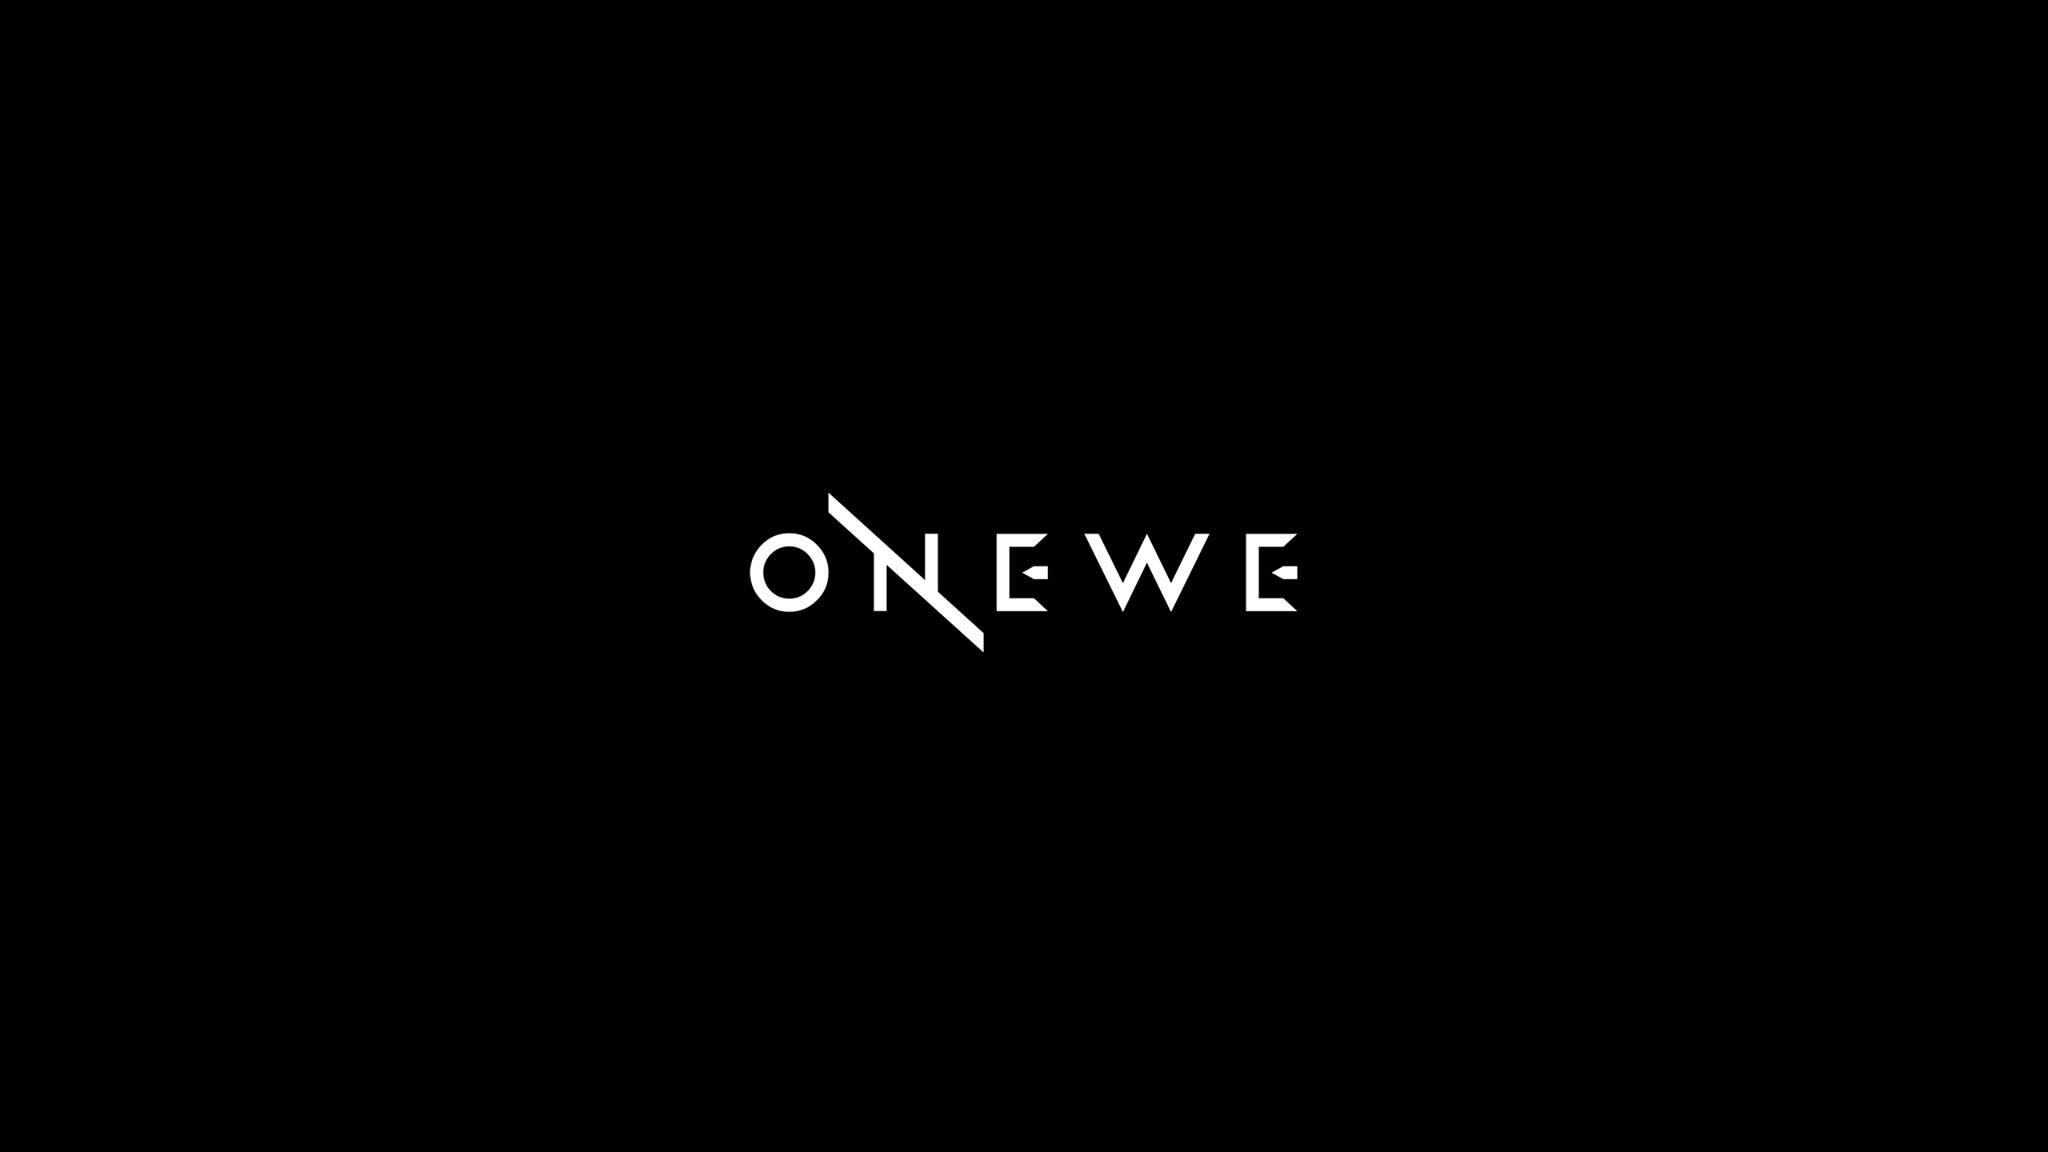 Onewe Wallpapers - Wallpaper Cave.